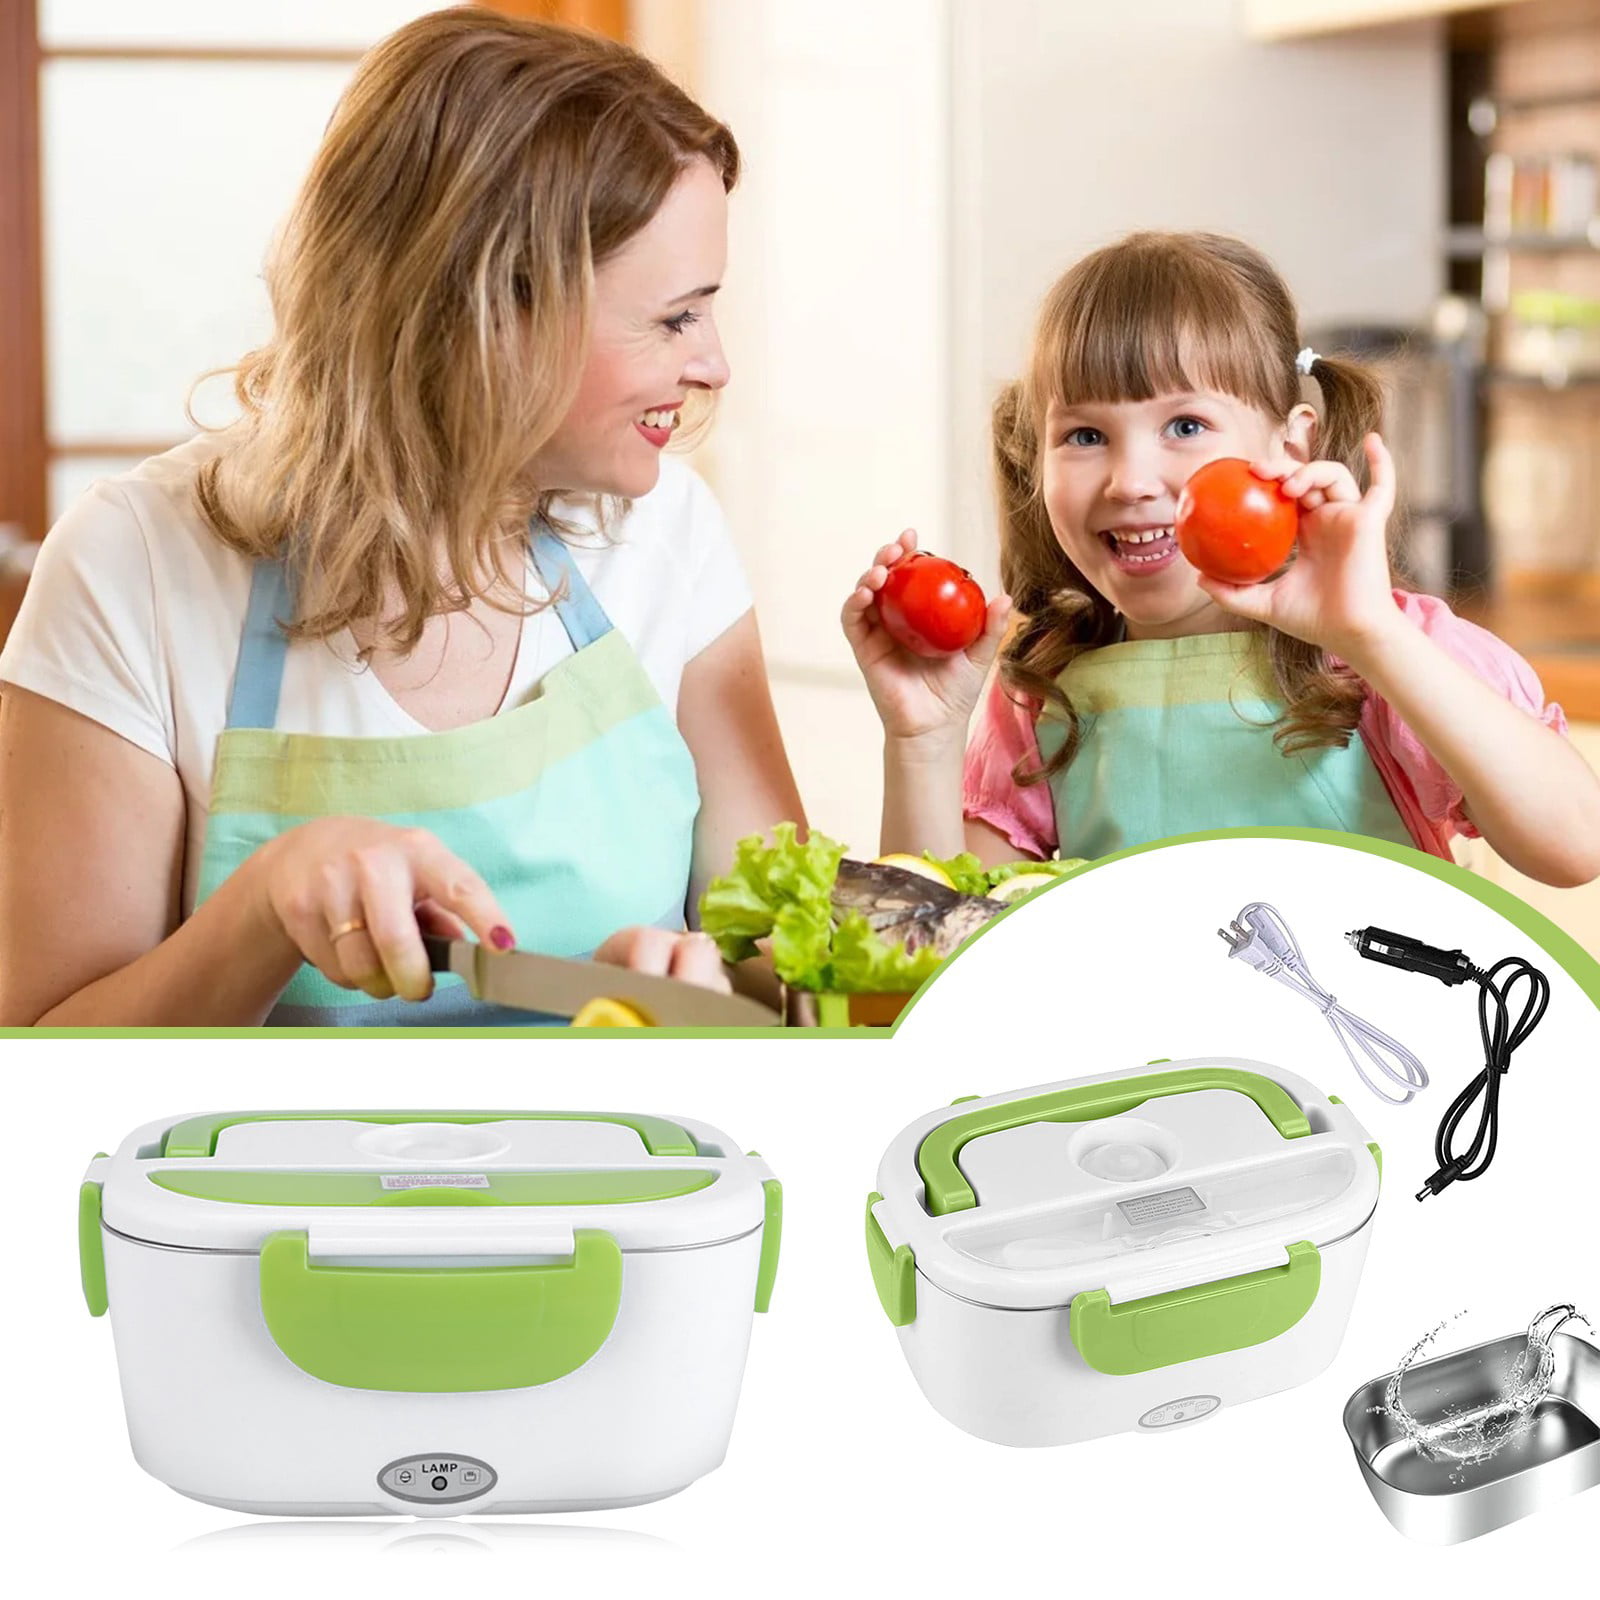 Electric Lunch Box, Heat Preservation and Heating Lunch Box, Self